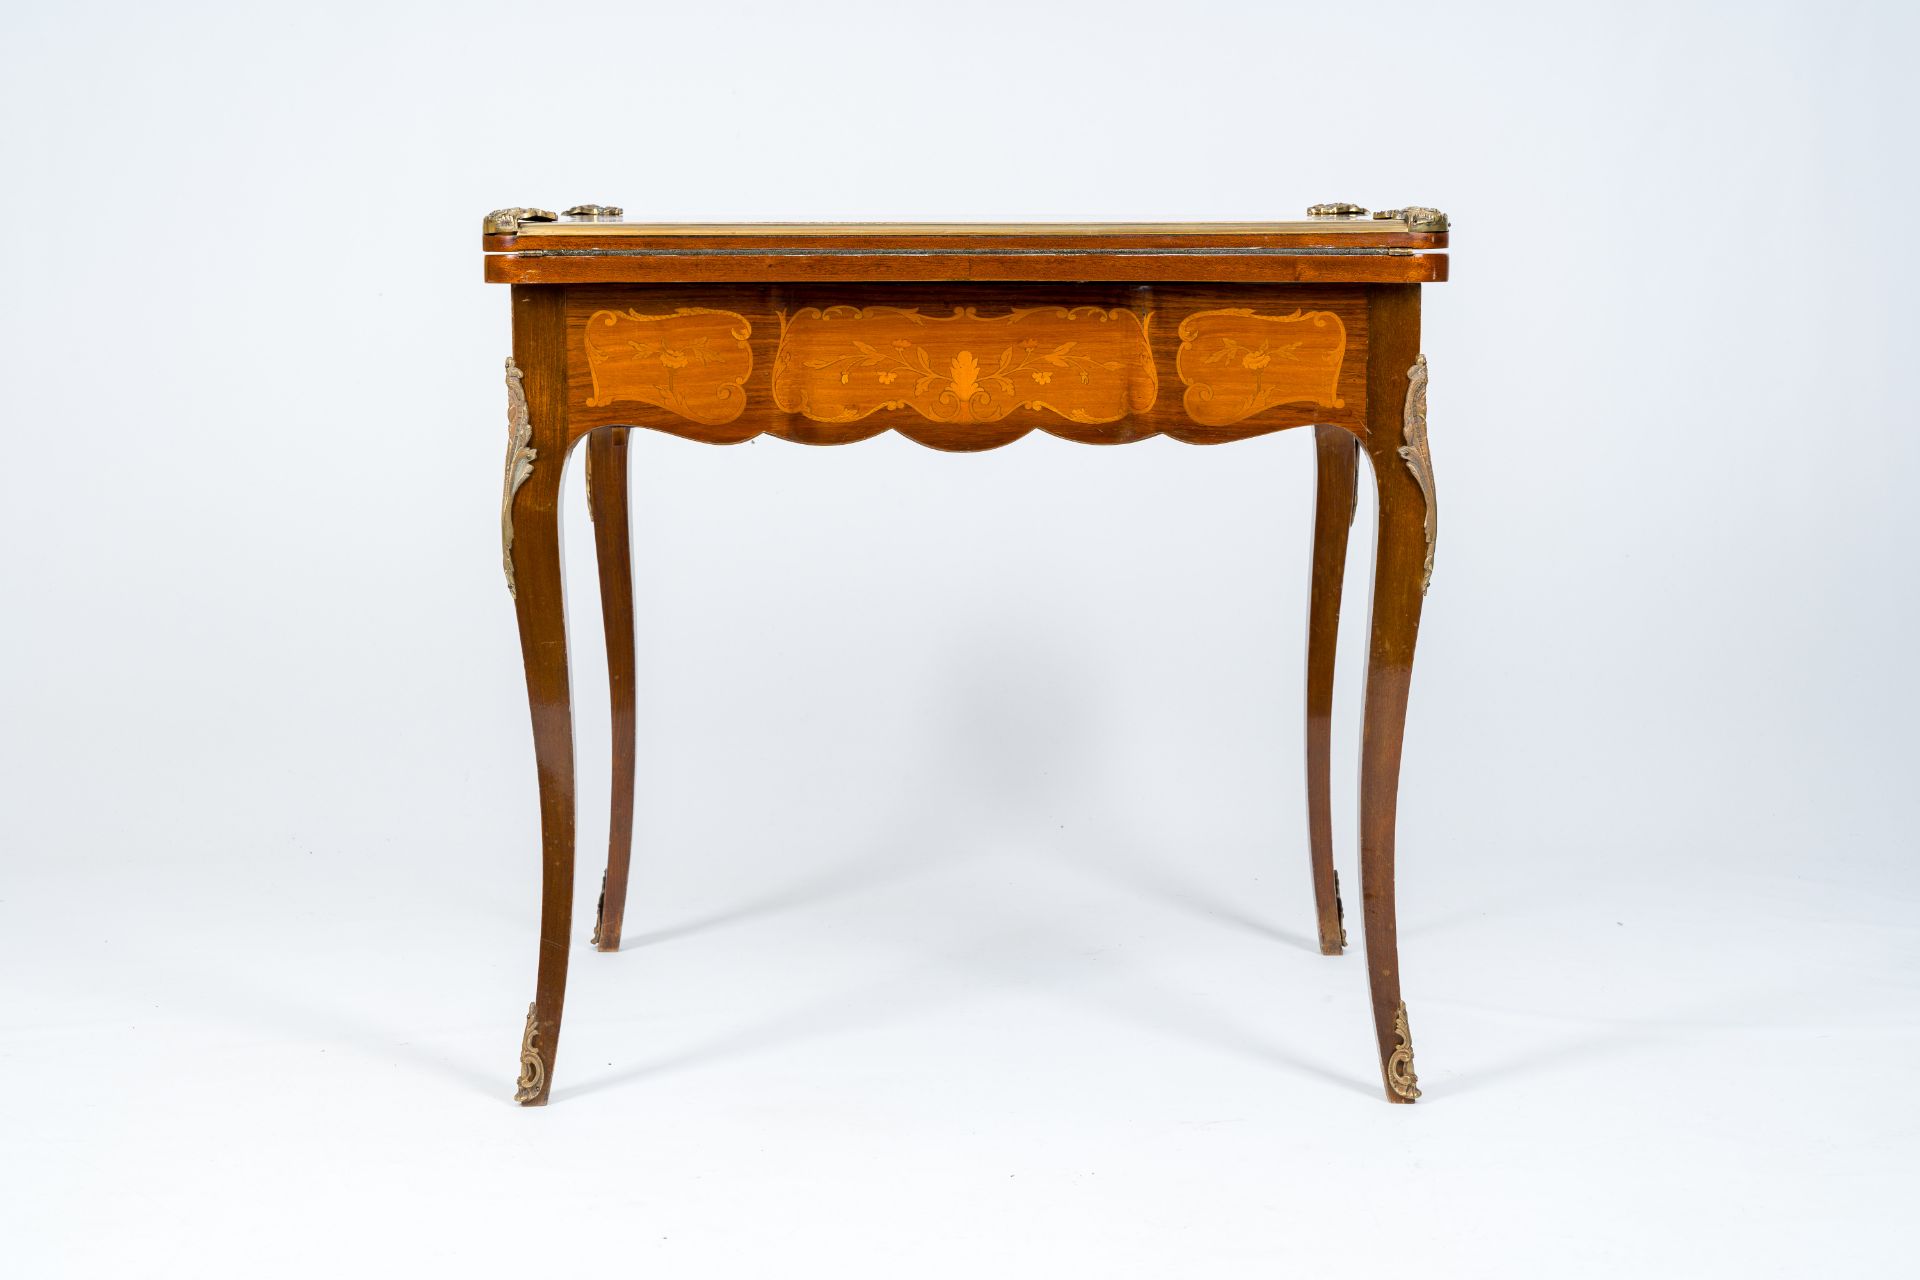 A French bronze mounted wood game table with marquetry top, 19th/20th C. - Image 7 of 10